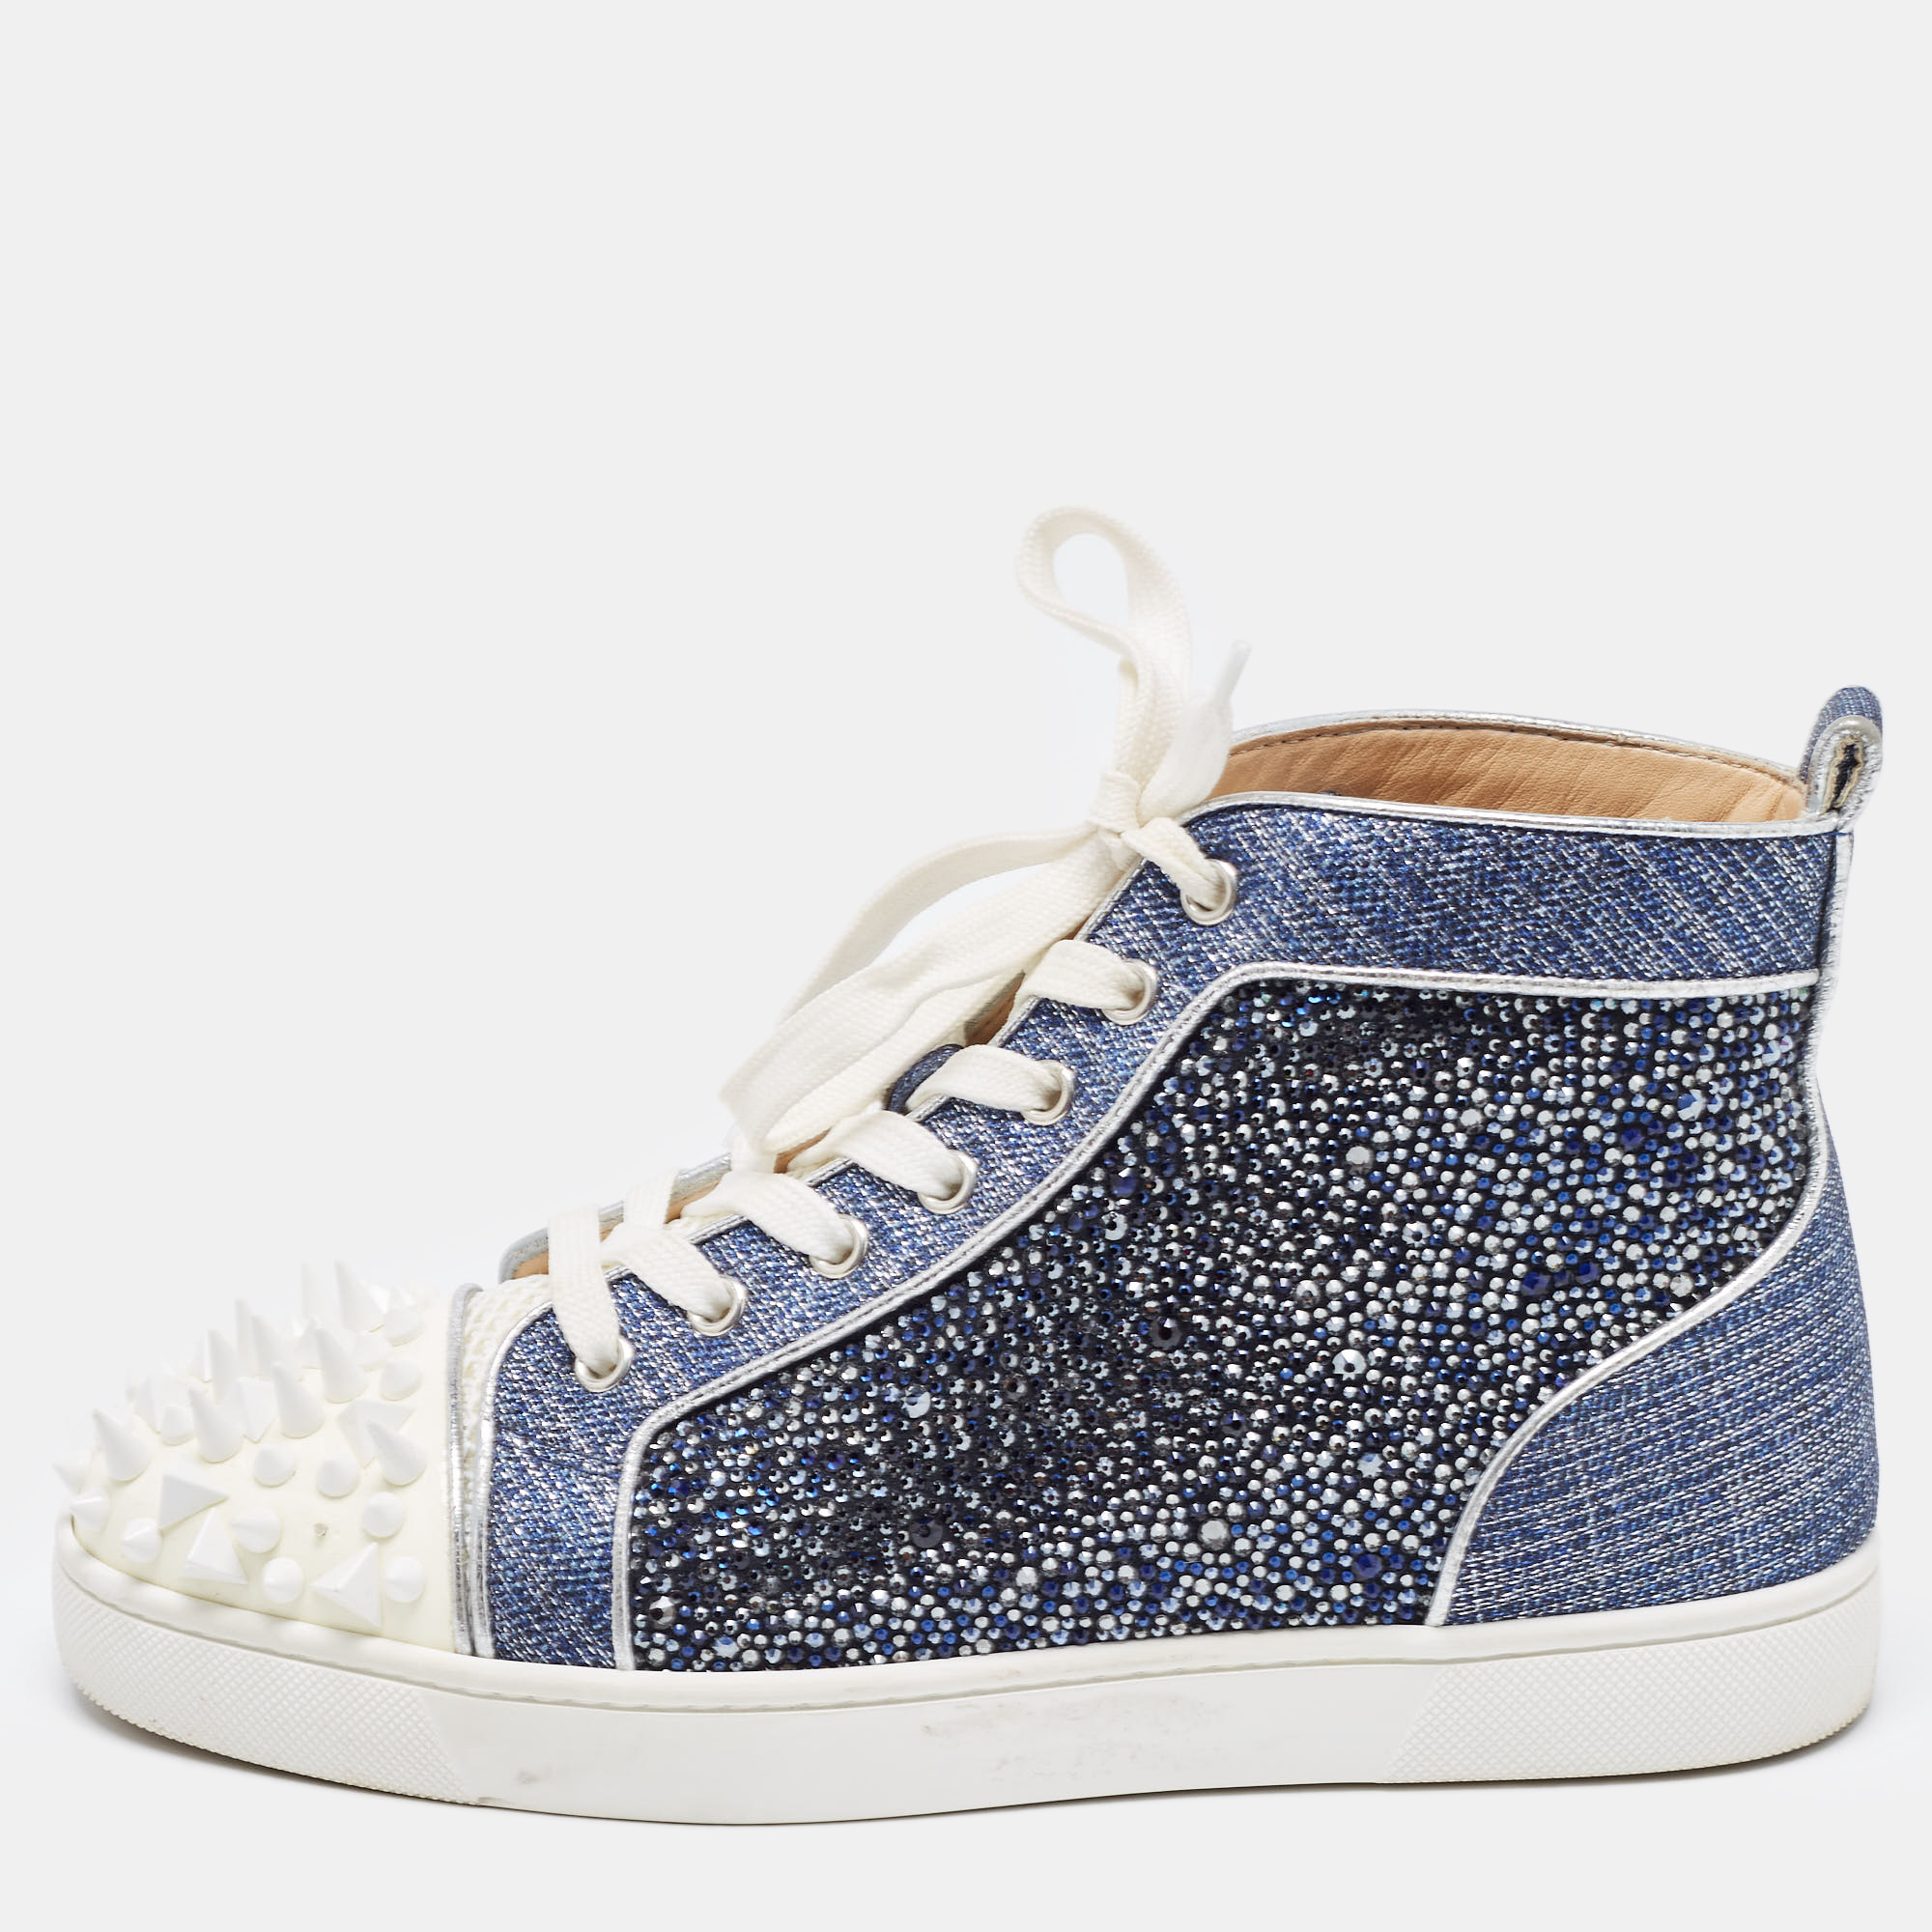 Christian louboutin blue/silver denim and patent lou degra spikes studded hi high top sneakers size 39